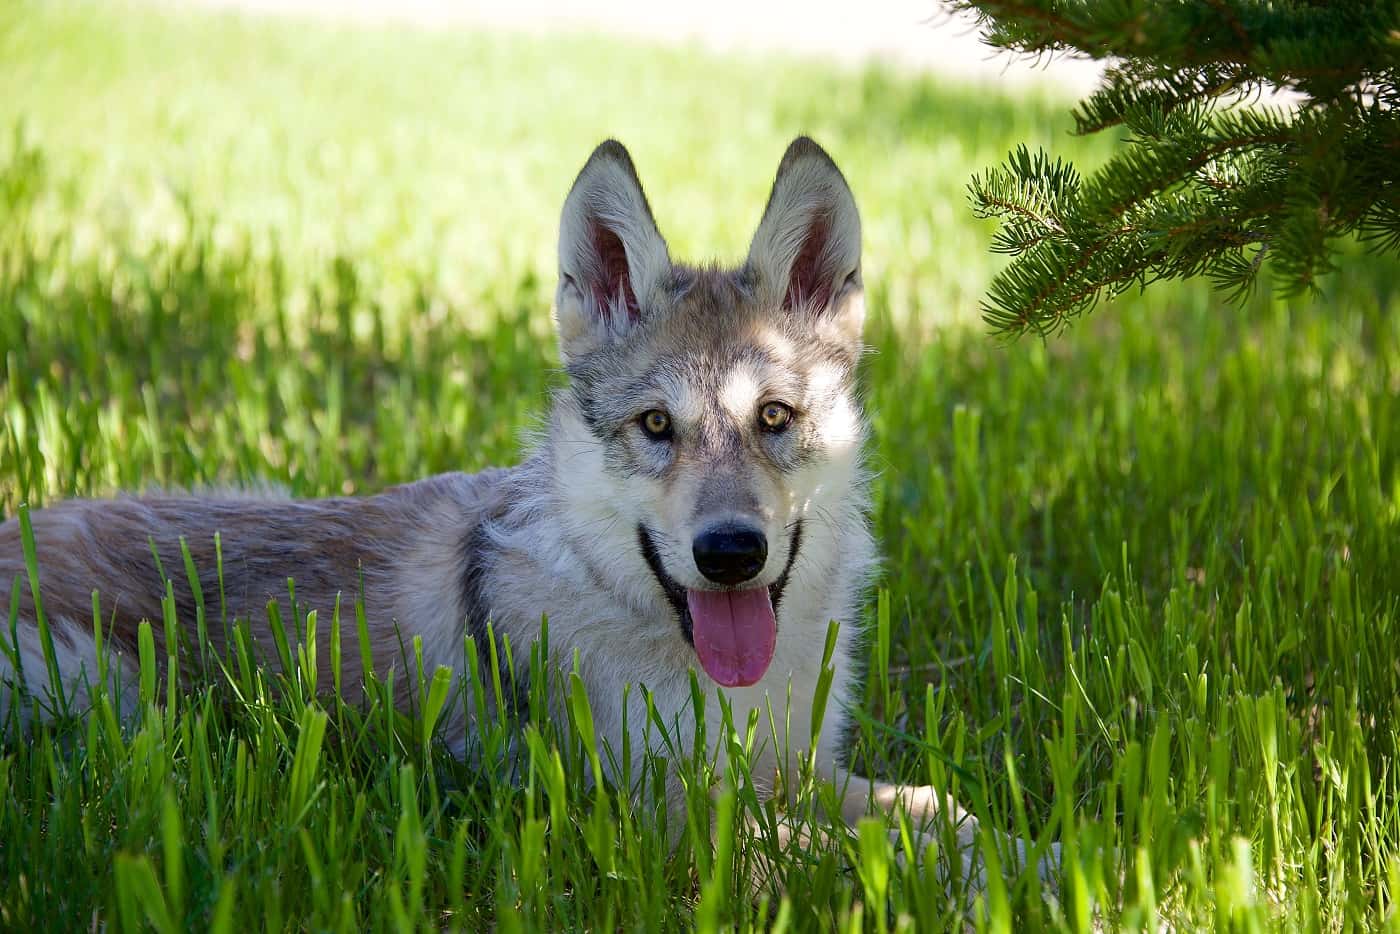 A Wolf pup in the grass